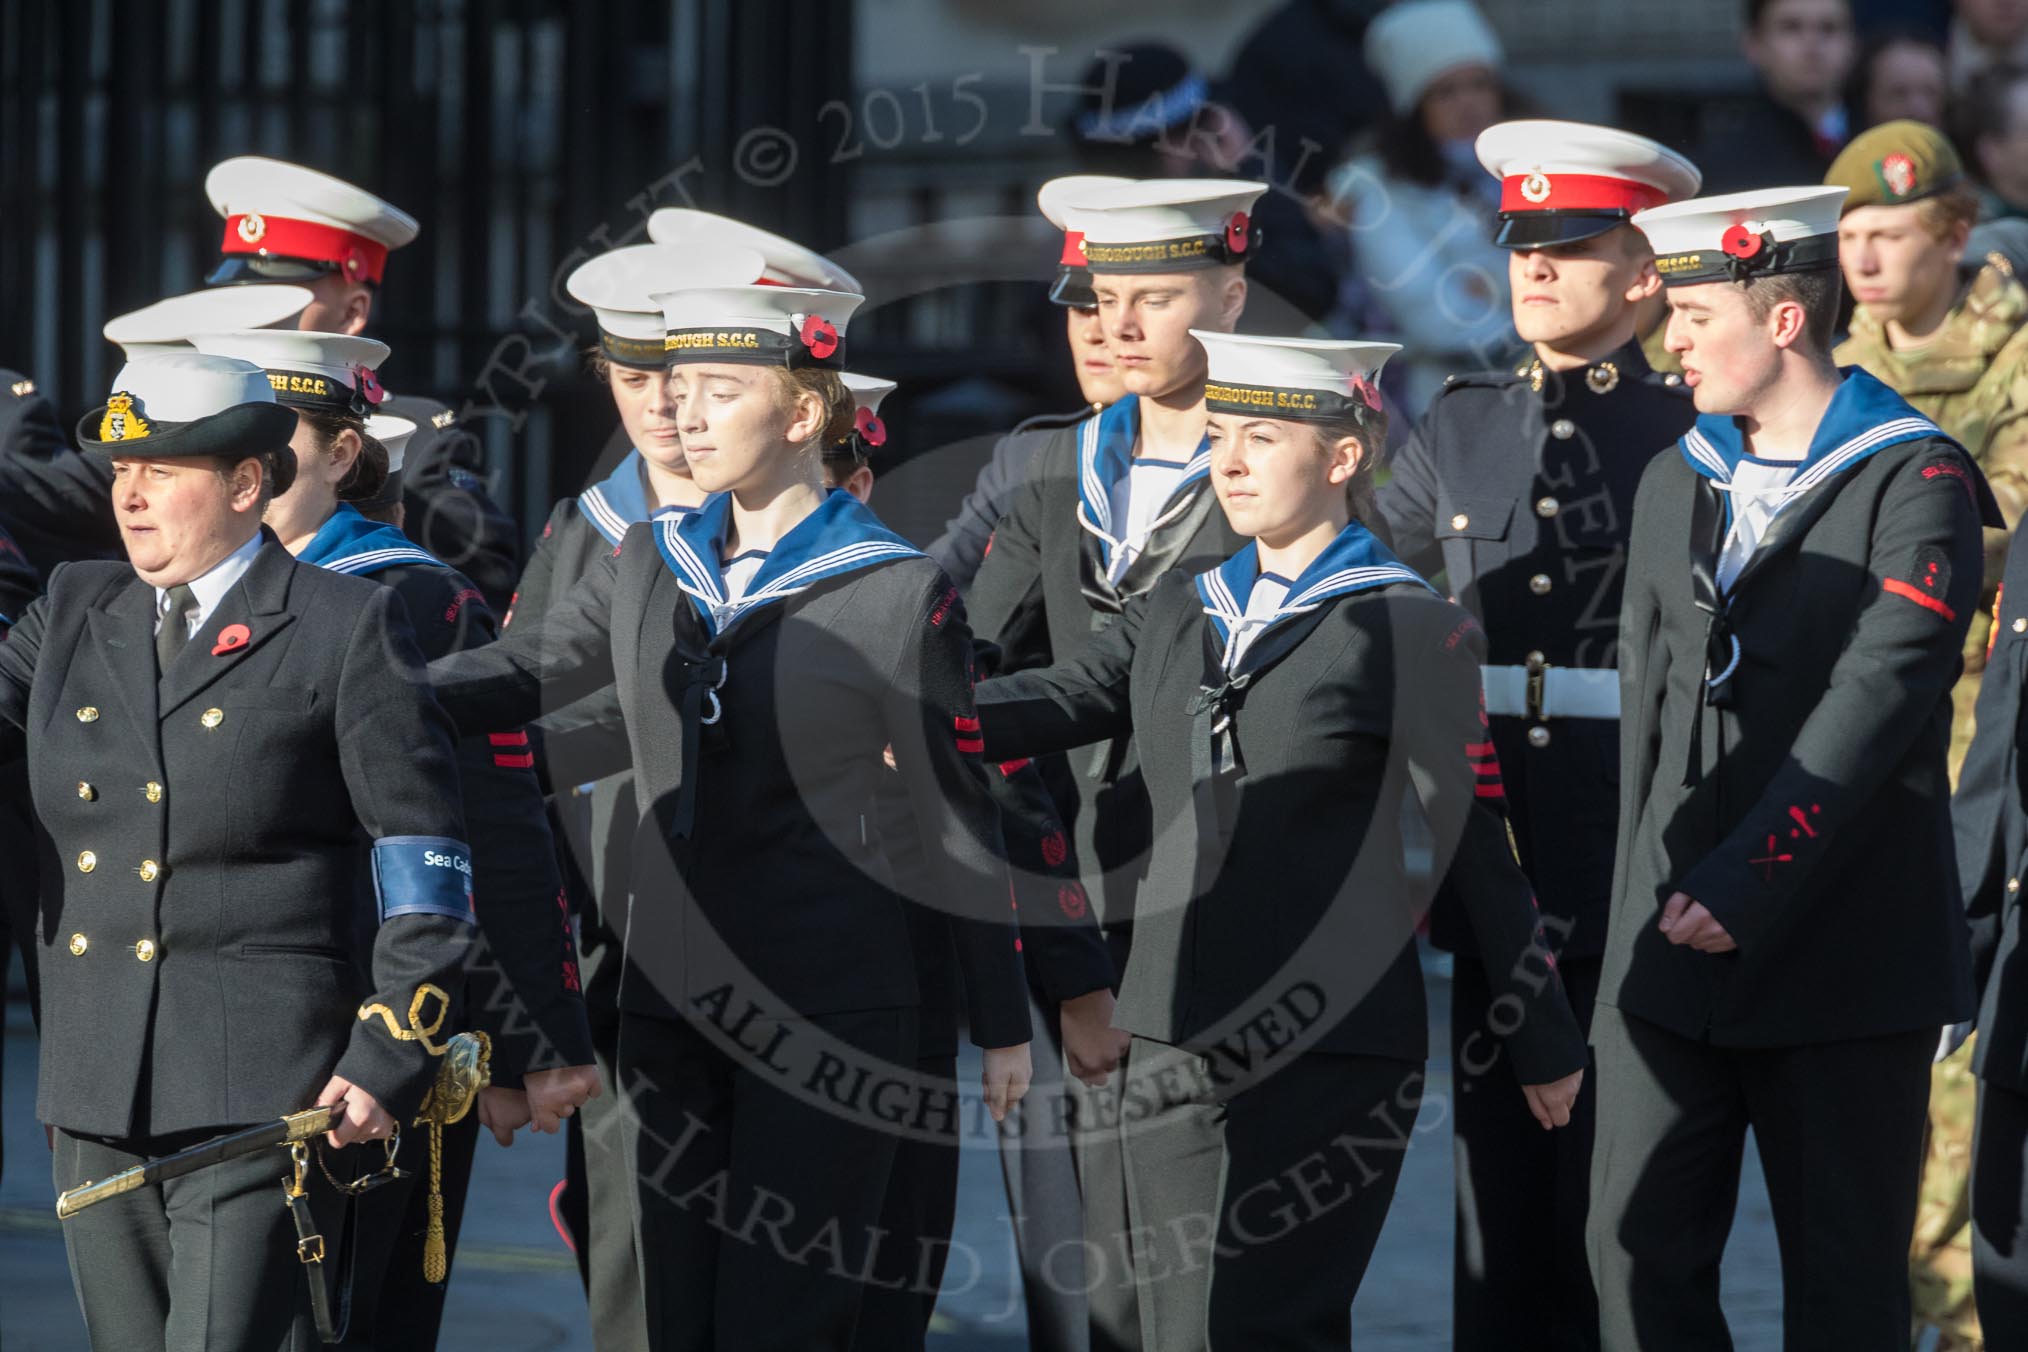 March Past, Remembrance Sunday at the Cenotaph 2016: M32 Army and combined Cadet Force.
Cenotaph, Whitehall, London SW1,
London,
Greater London,
United Kingdom,
on 13 November 2016 at 13:17, image #2794